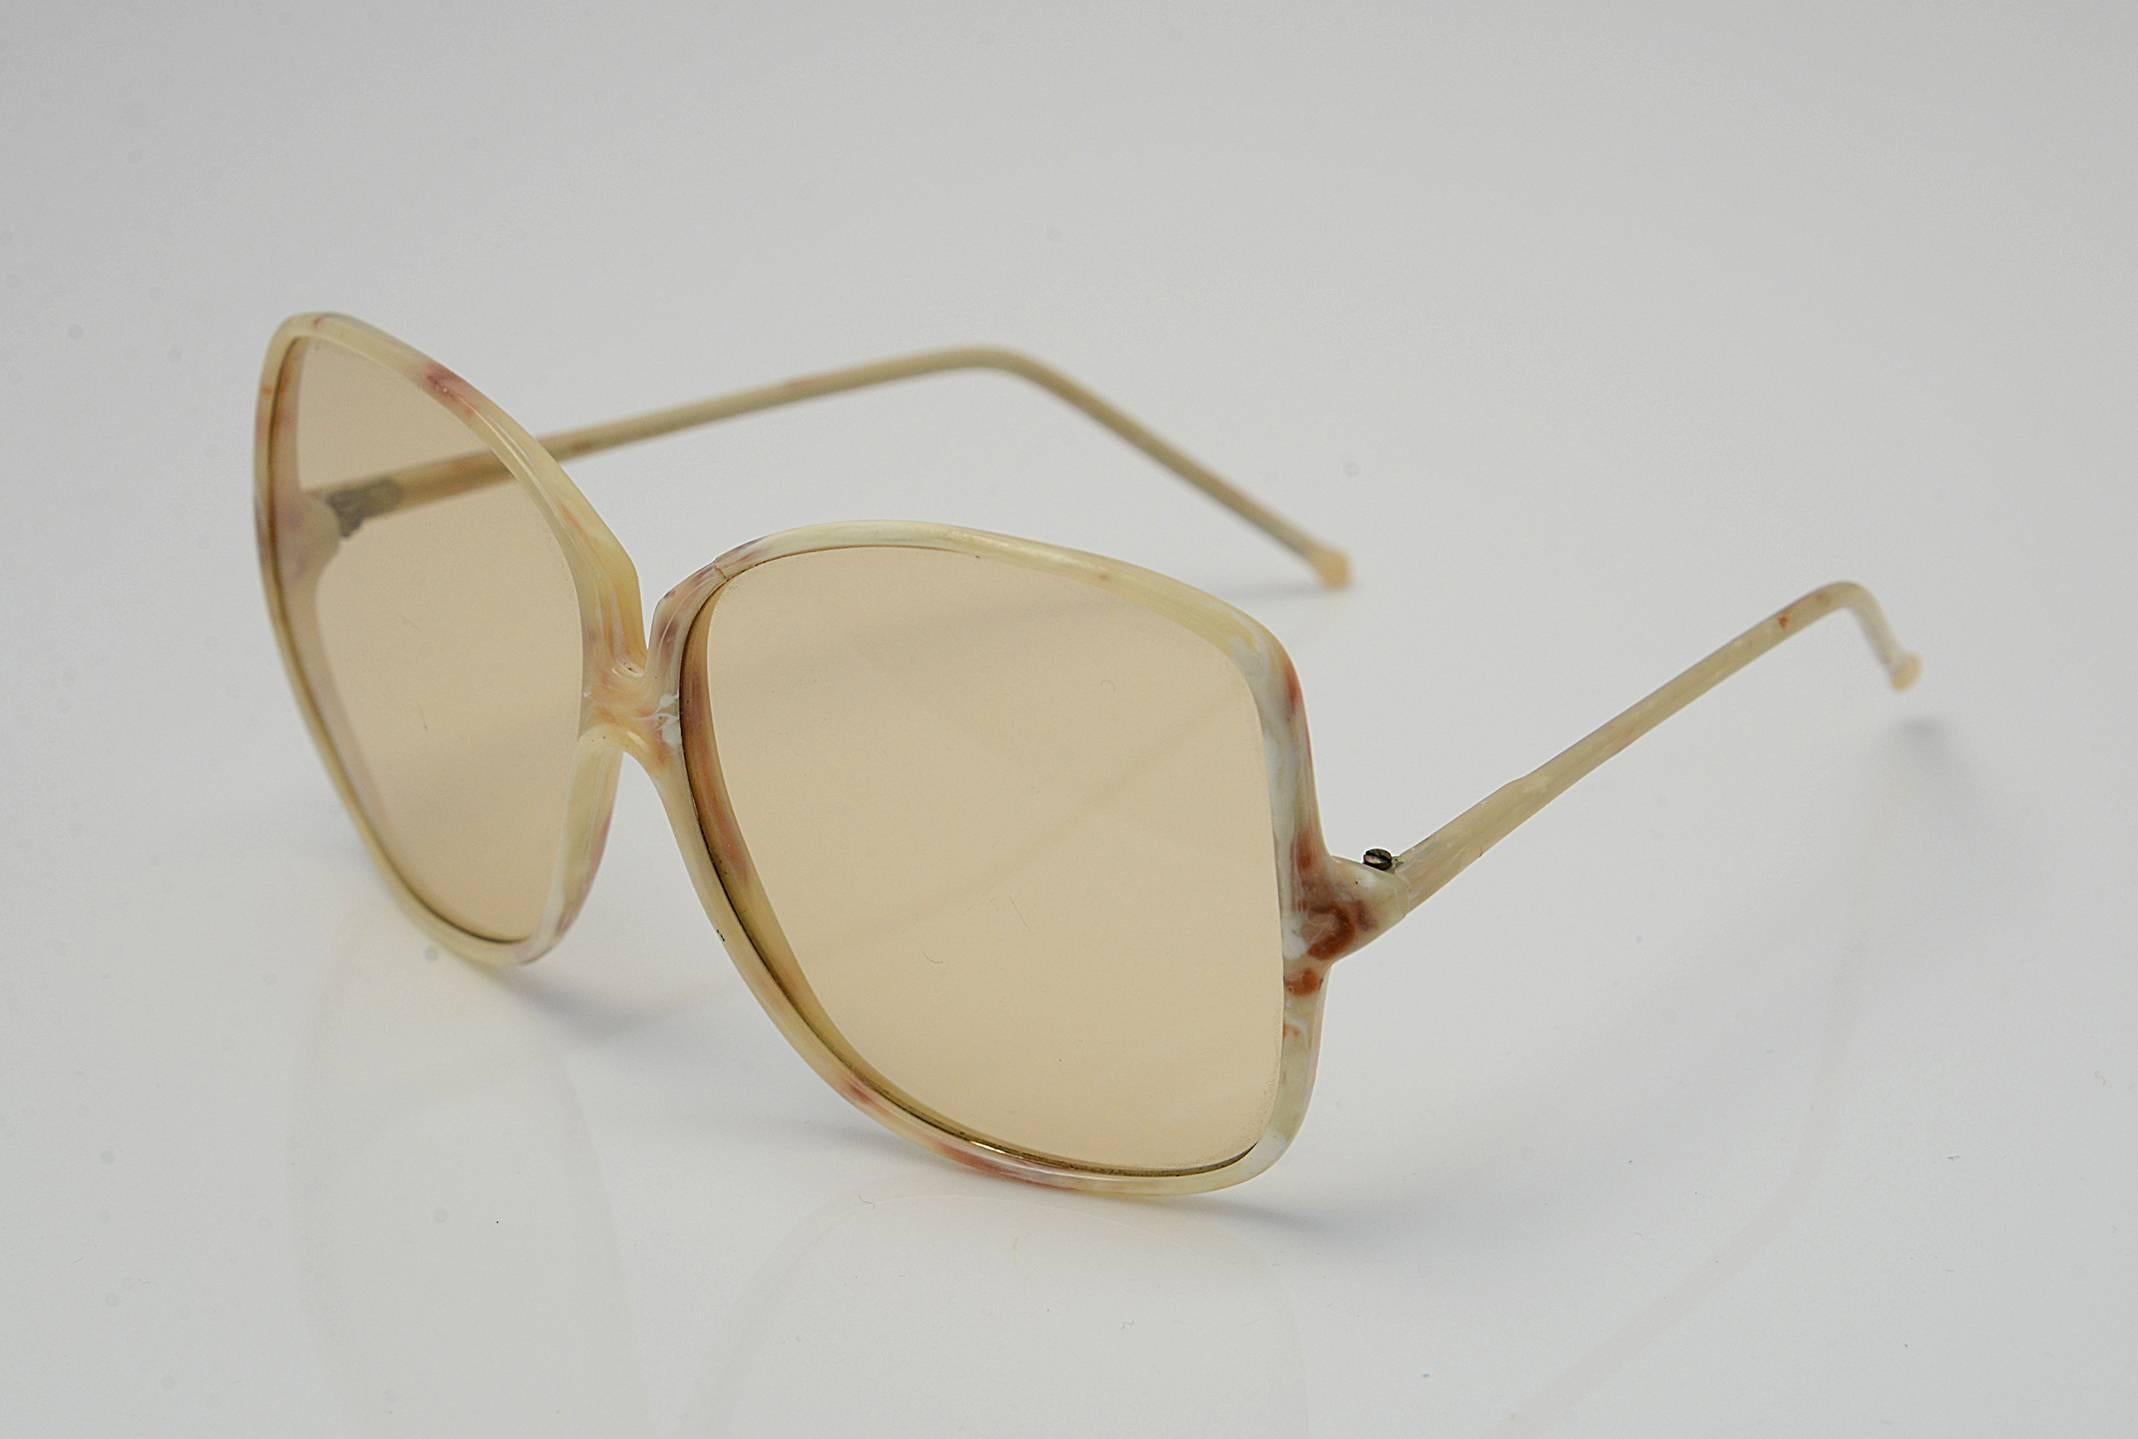 Fabulously large cream sunglasses from the 1970s made by Piave. Glasses have a marbled look, as the cream mixes with a wonderful brown. These sunglasses are the perfect pair to transform your outfit into that ultimate 1970s look. Glasses have a